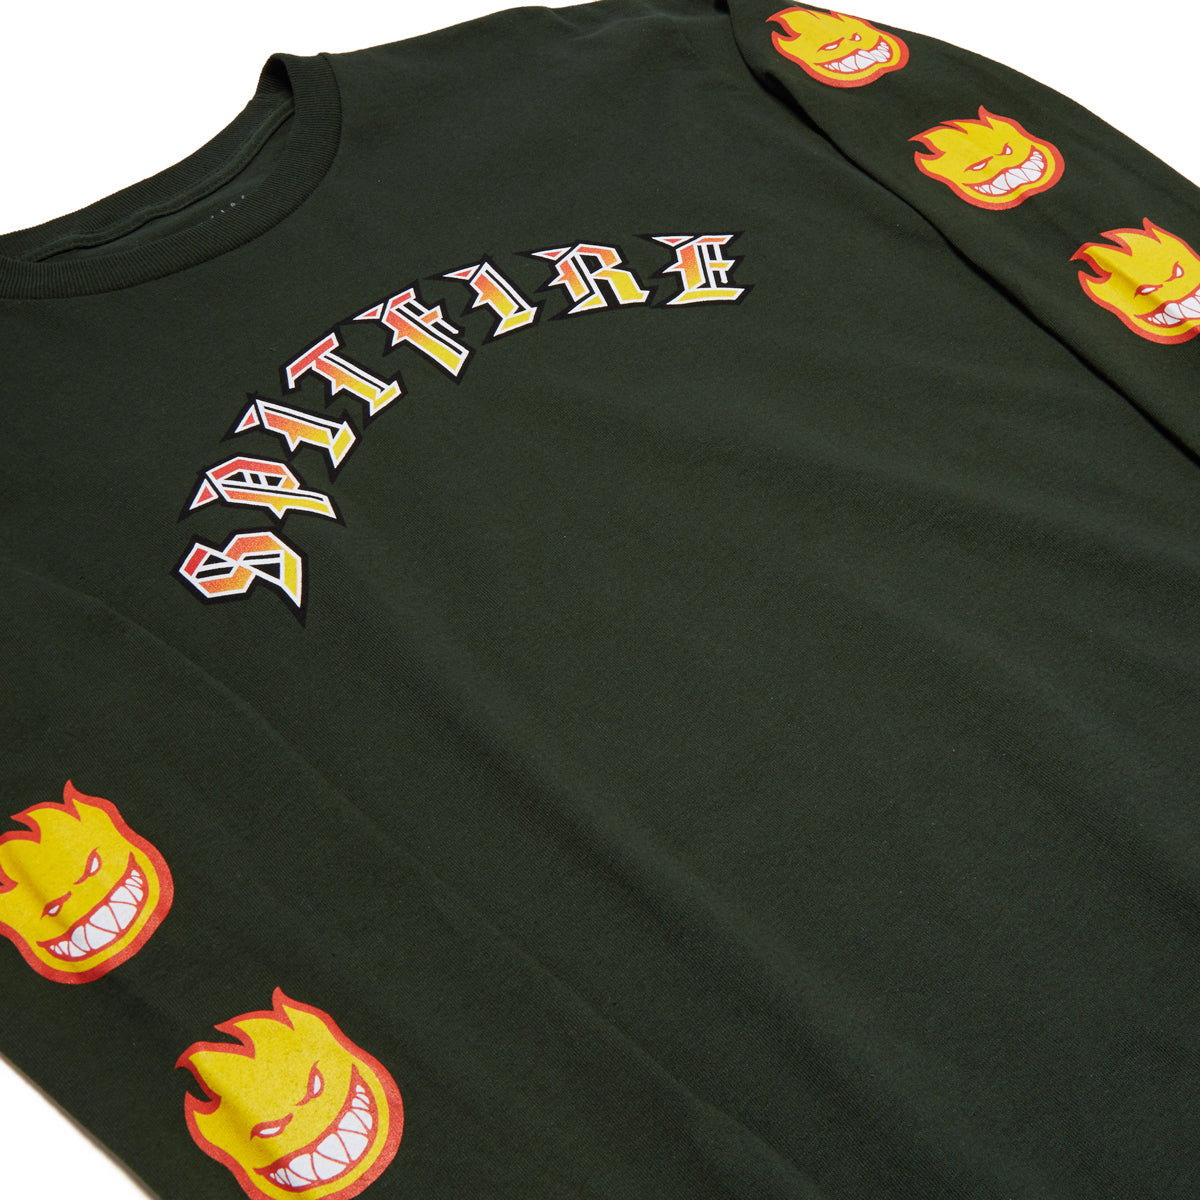 Spitfire Old E Bighead Fill Long Sleeve T-Shirt - Forest Green/Gold/Red image 2